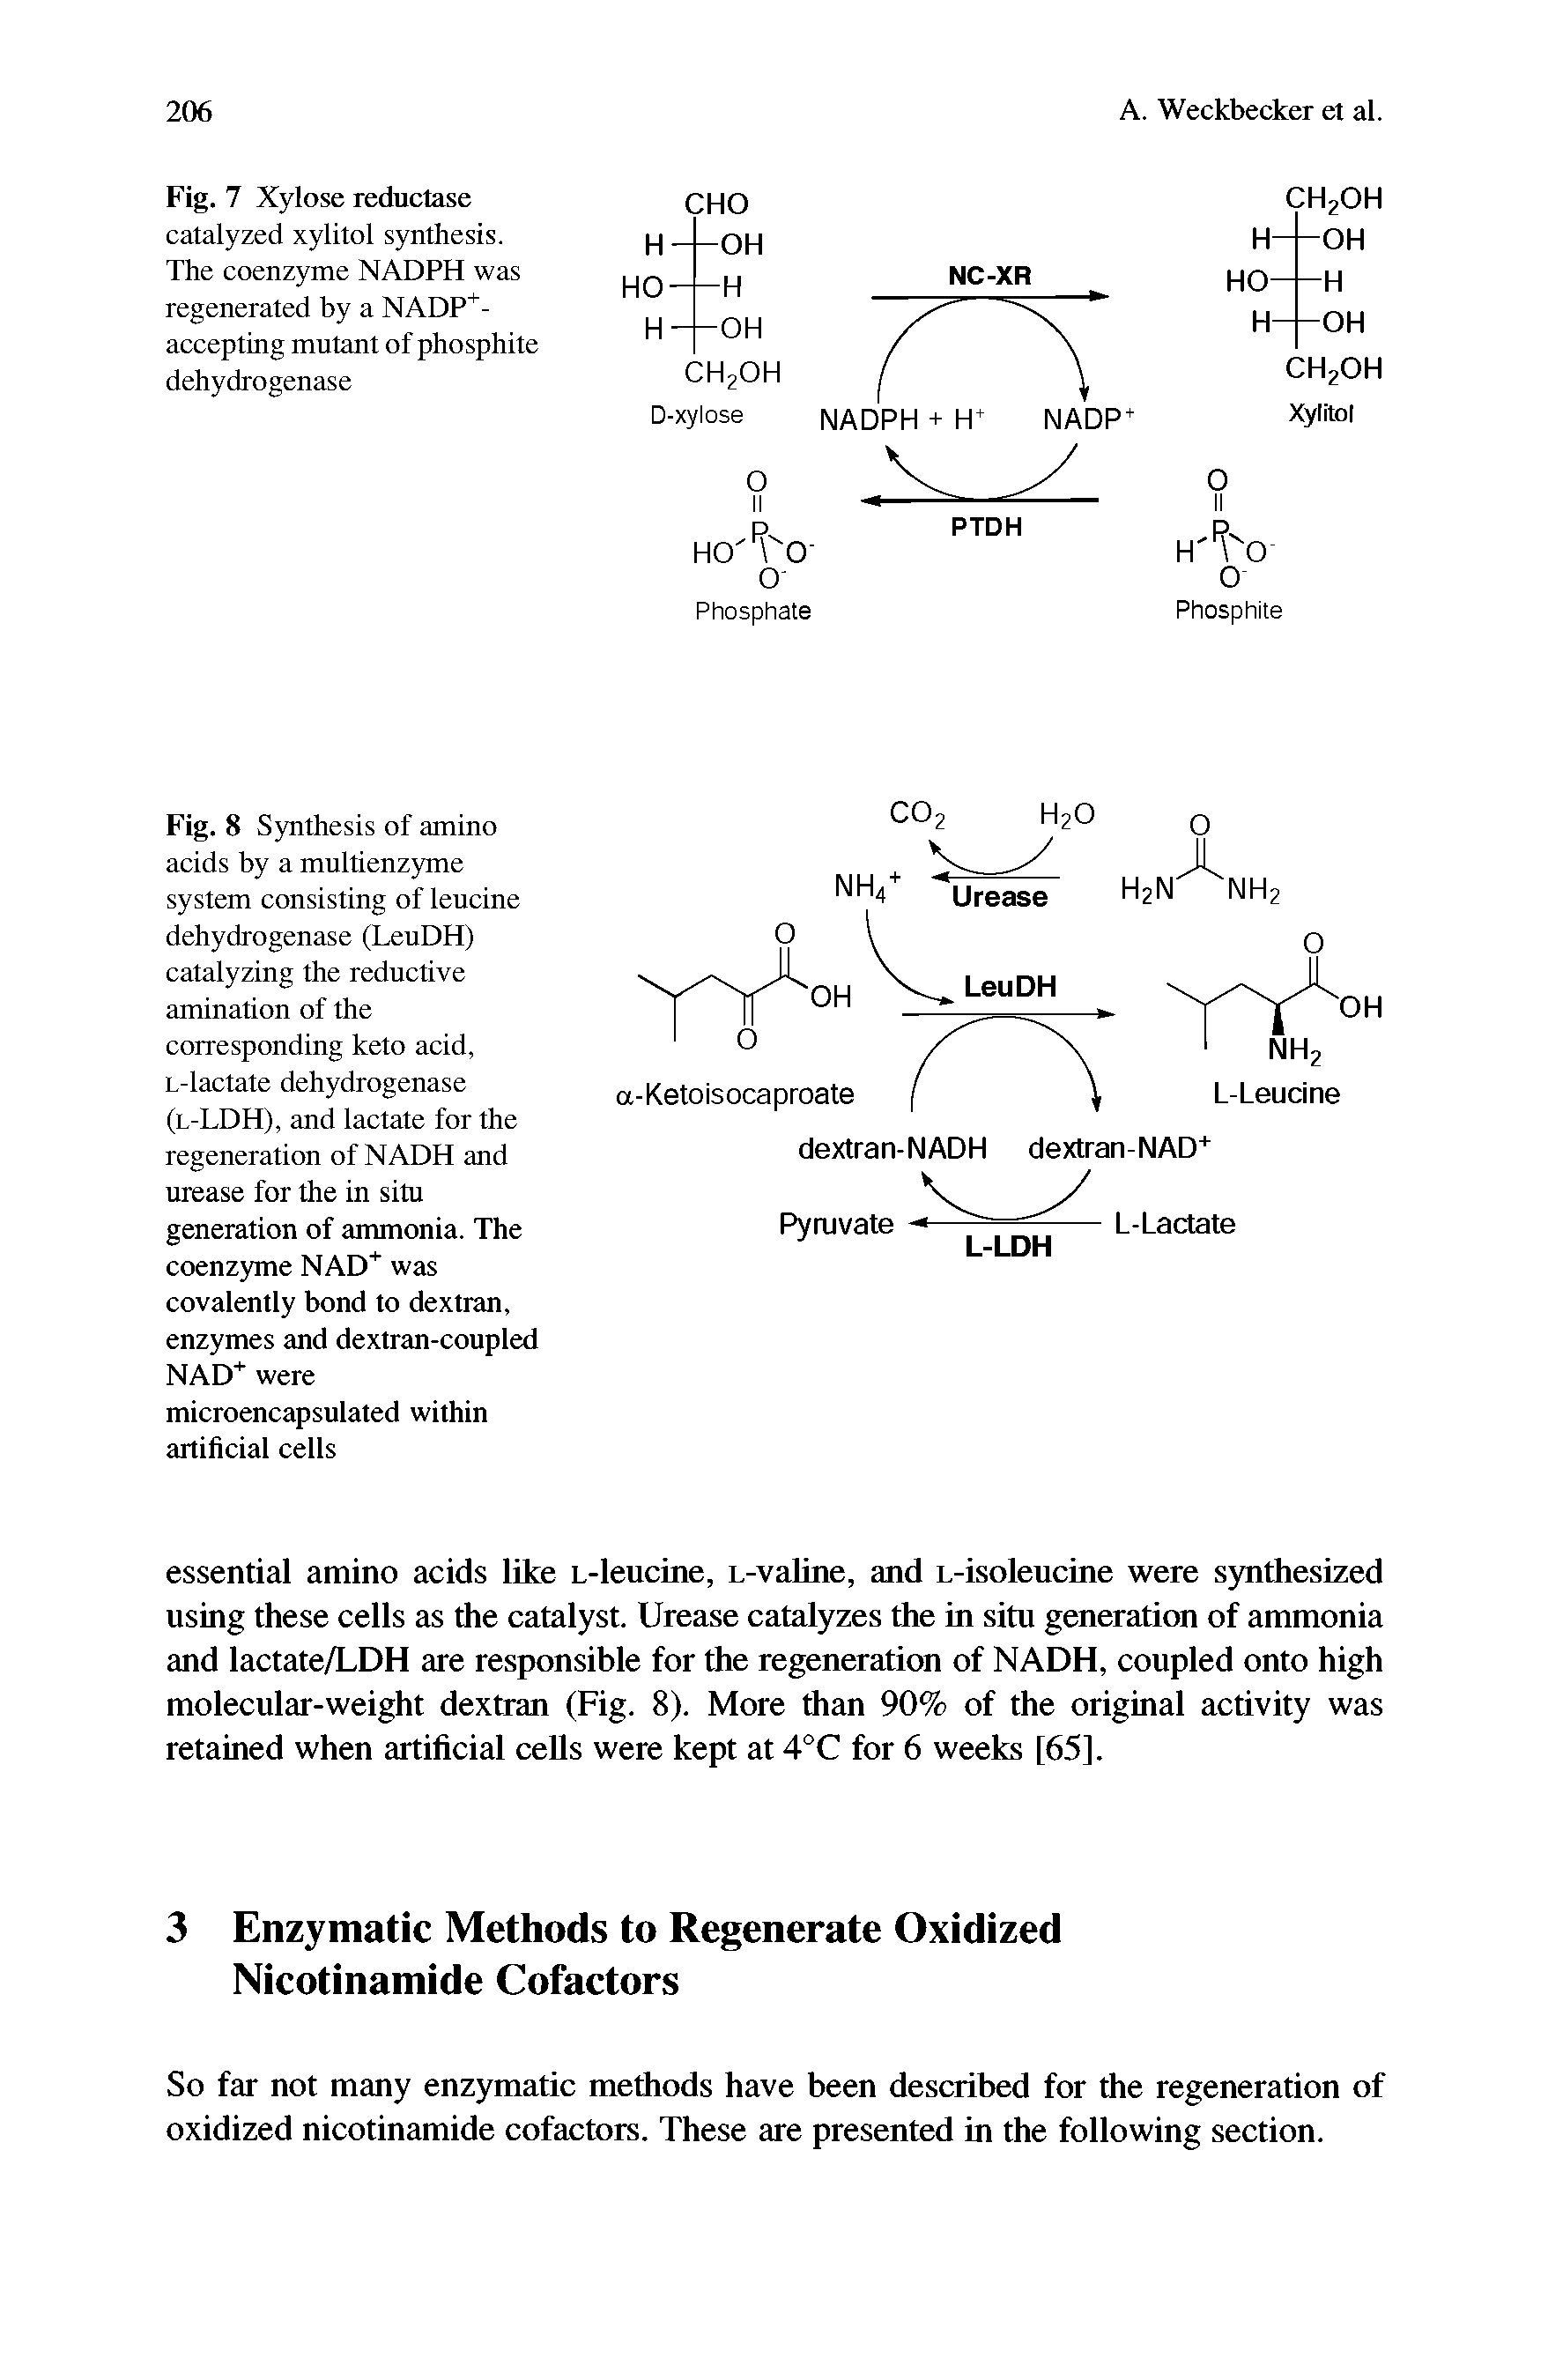 Fig. 8 Synthesis of amino acids by a multienzyme system consisting of leucine dehydrogenase (LeuDH) catalyzing the reductive amination of the corresponding keto acid, L-lactate dehydrogenase (l-LDH), and lactate for the regeneration of NADH and urease for the in situ generation of ammonia. The coenzyme NAD+ was covalently bond to dextran, enzymes and dextran-coupled NAD+ were...